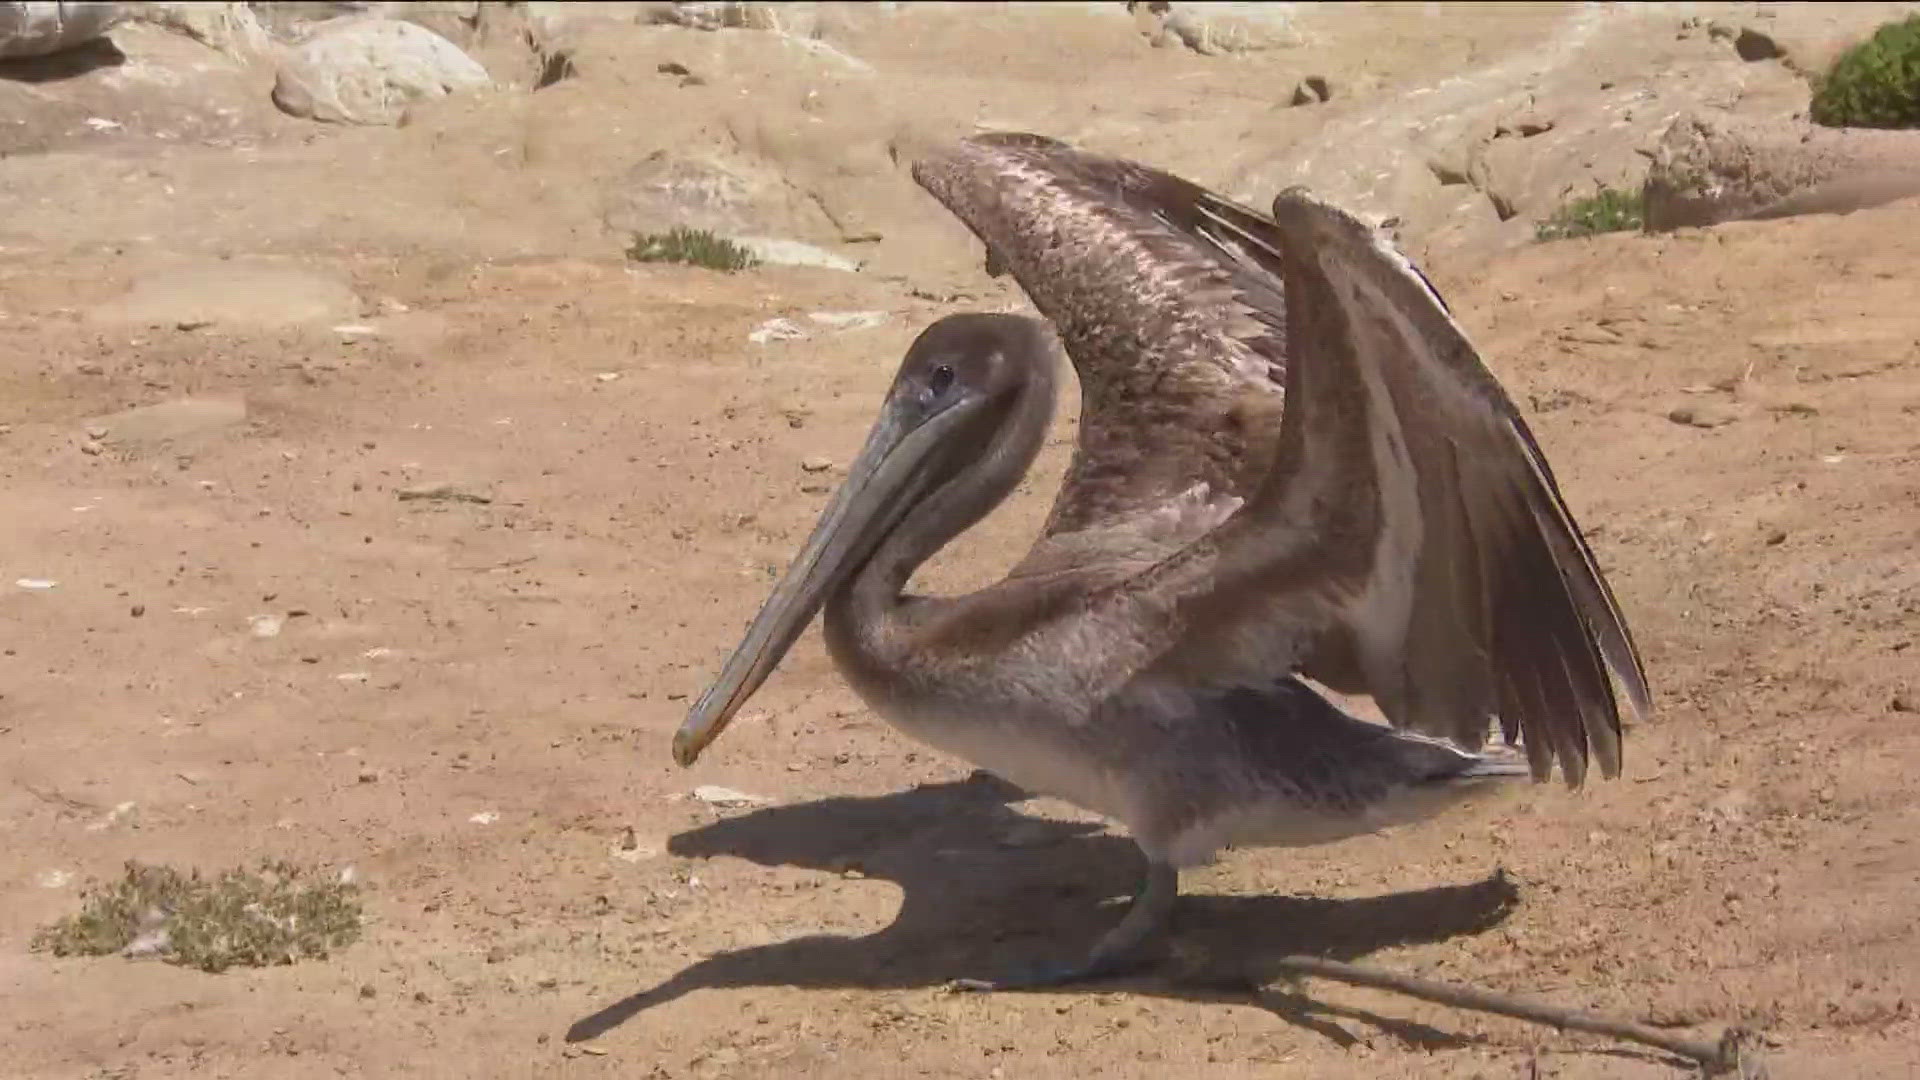 “The calls that I’m getting are pelicans in odd places, so parking lots, people’s backyards, inland. That is not common behaviors for pelicans.” -- SeaWorld Rescue.